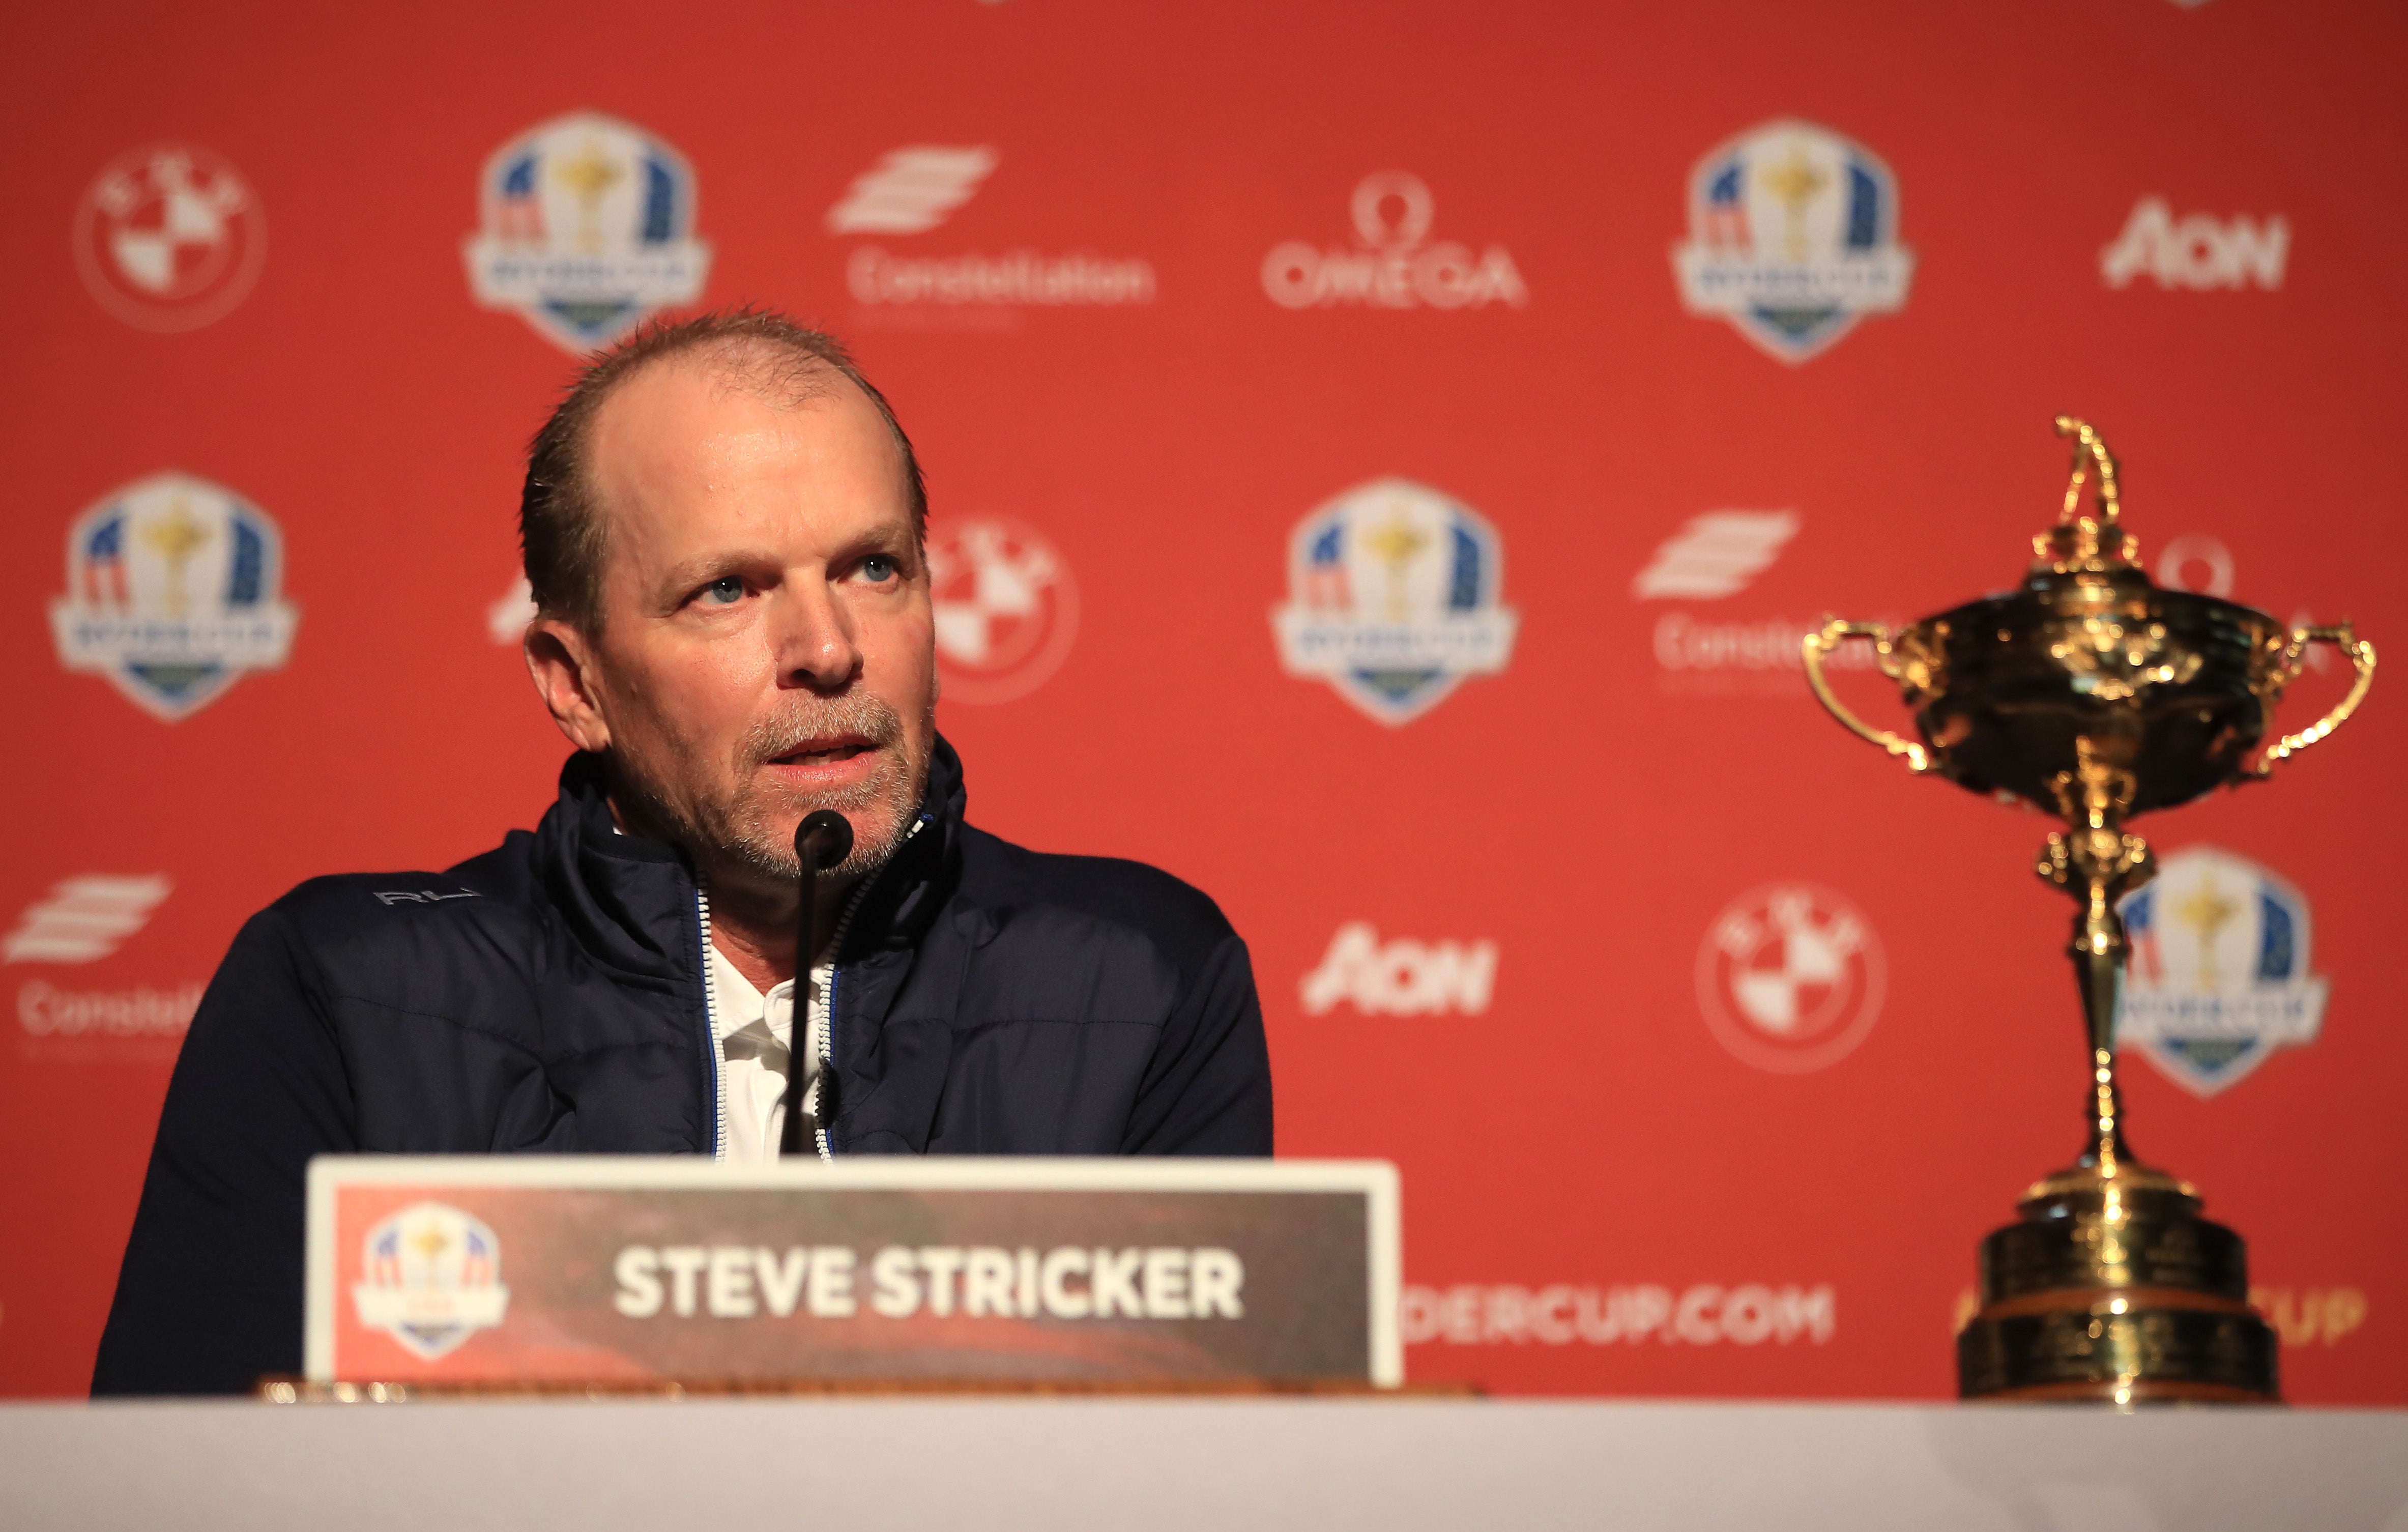 Steve Stricker is the Team USA captain for the 2021 Ryder Cup